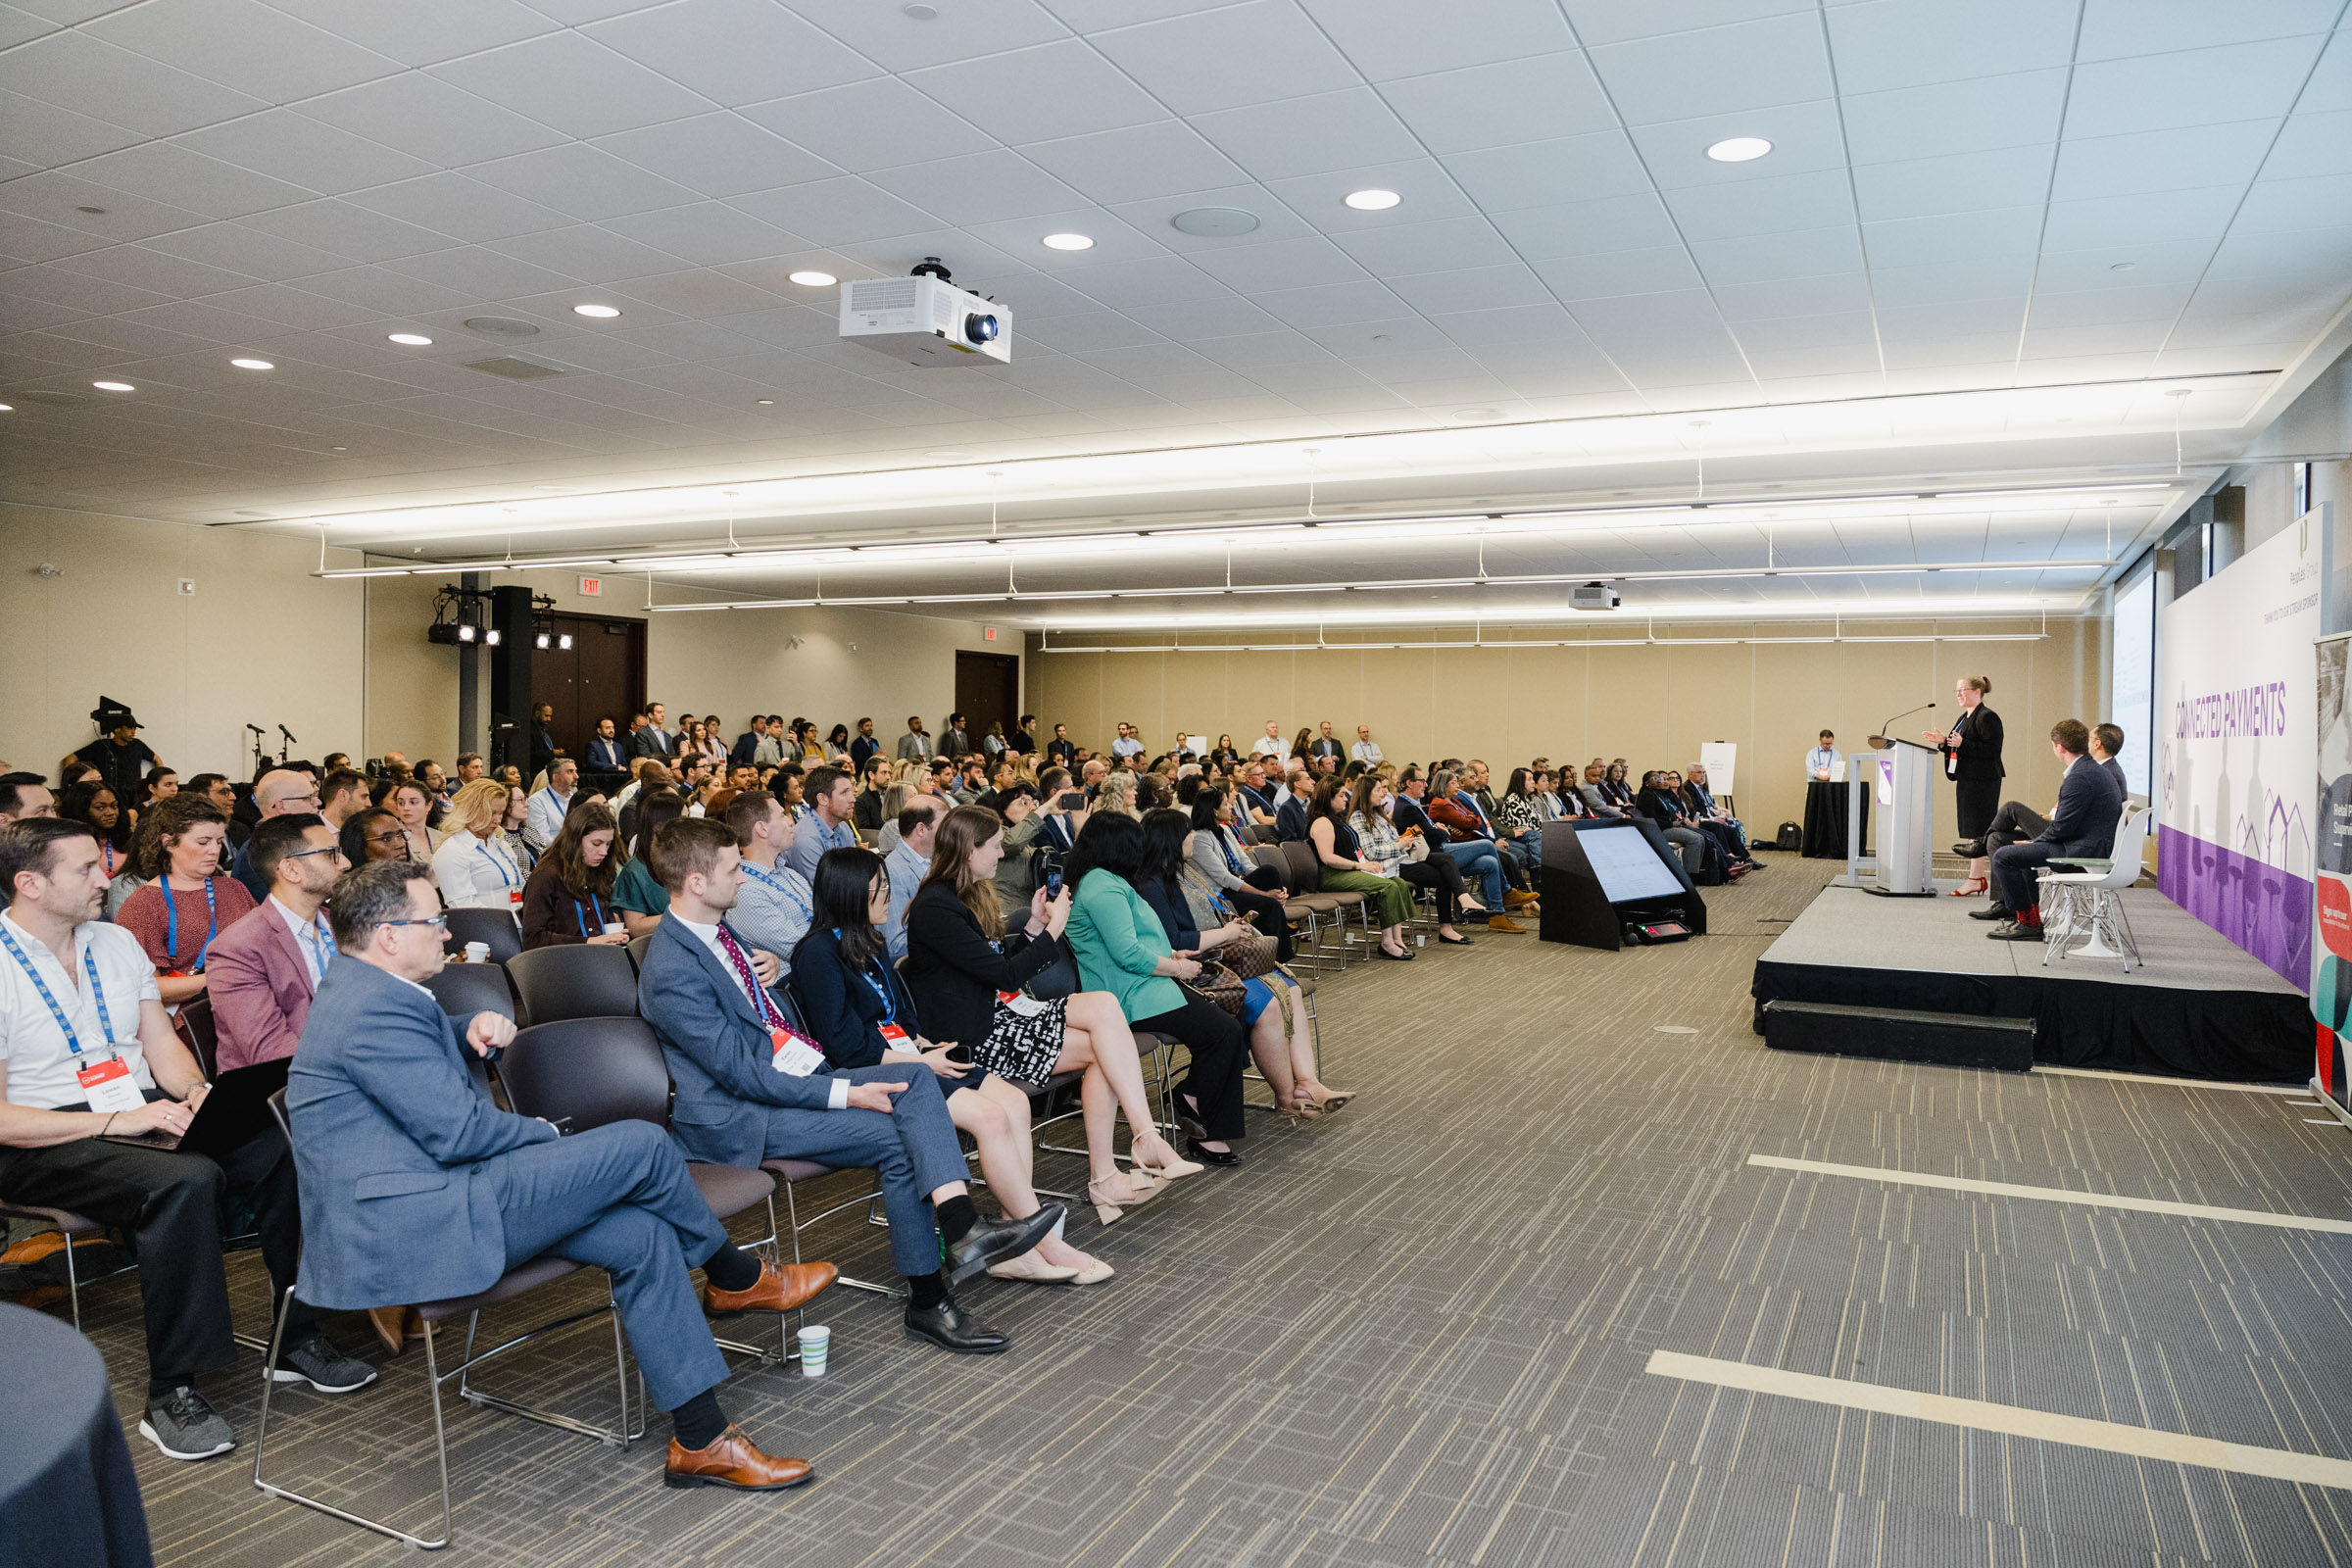 A large audience seated in a modern conference room listens to a panel of speakers on stage, all captured through skilled event photography. The room is well lit with a projector on the ceiling and a presentation screen in the background.